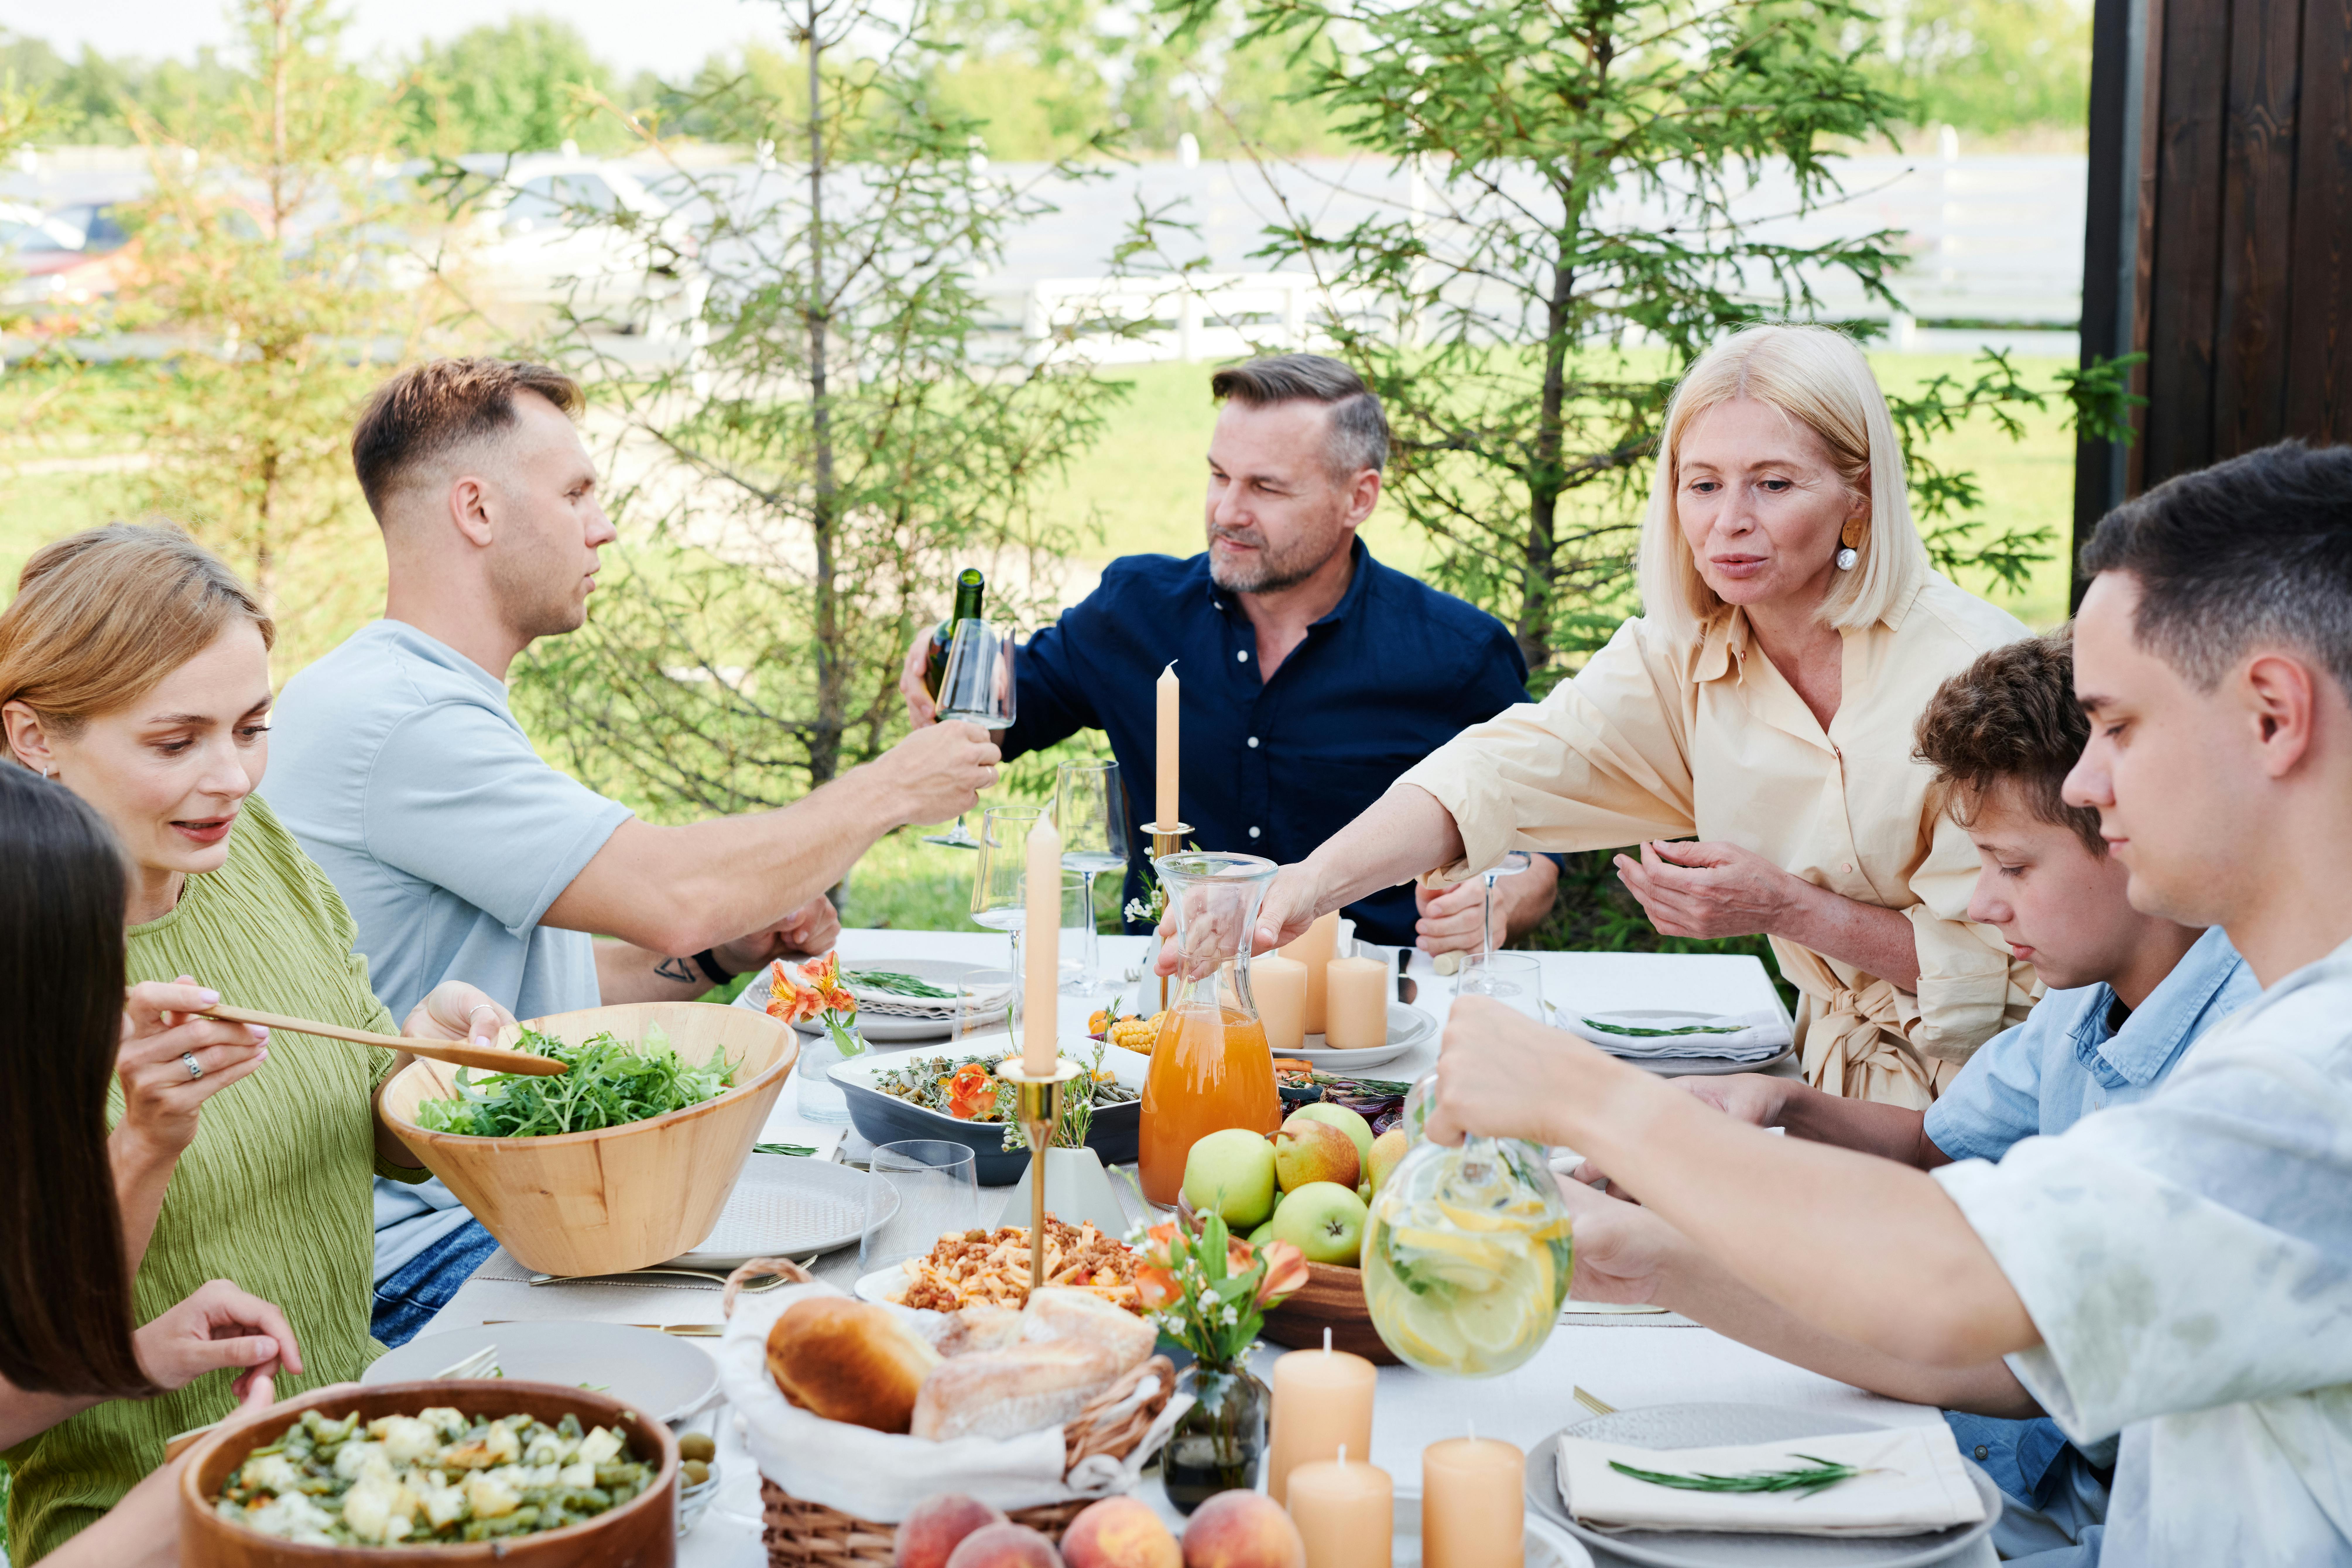 Family gathering in the yard | Source: Pexels